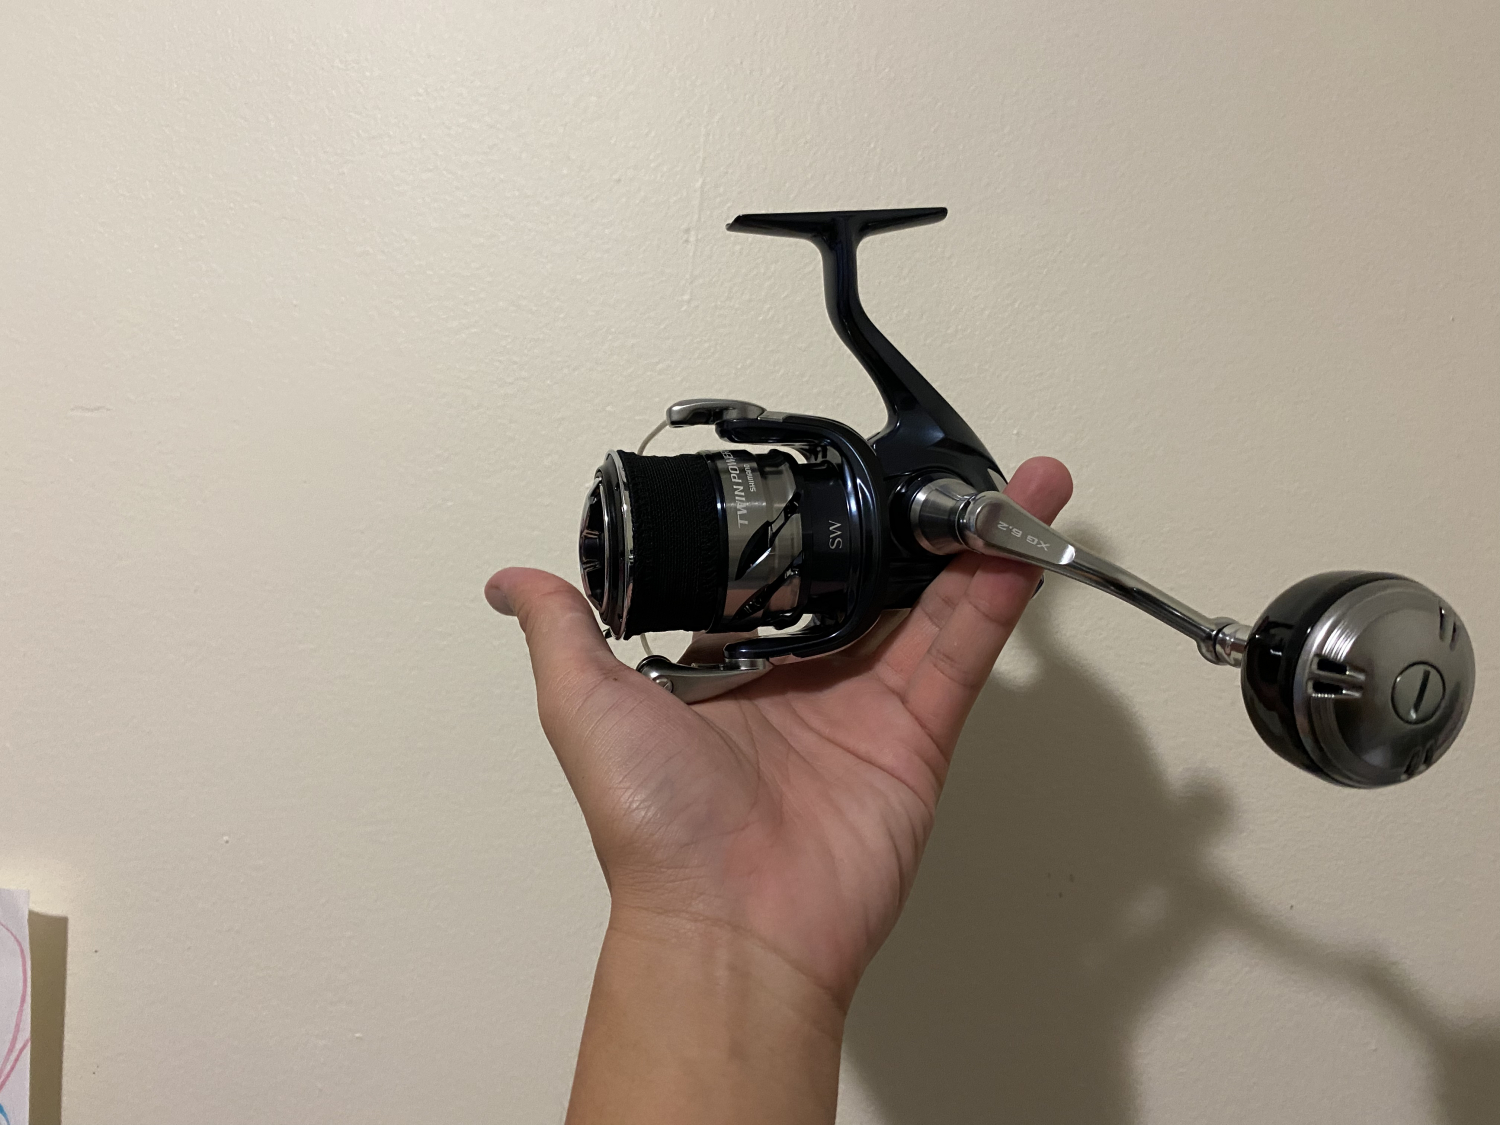 Shimano TPSW14000XGC TwinPower SW C Spinning Reel - TackleDirect